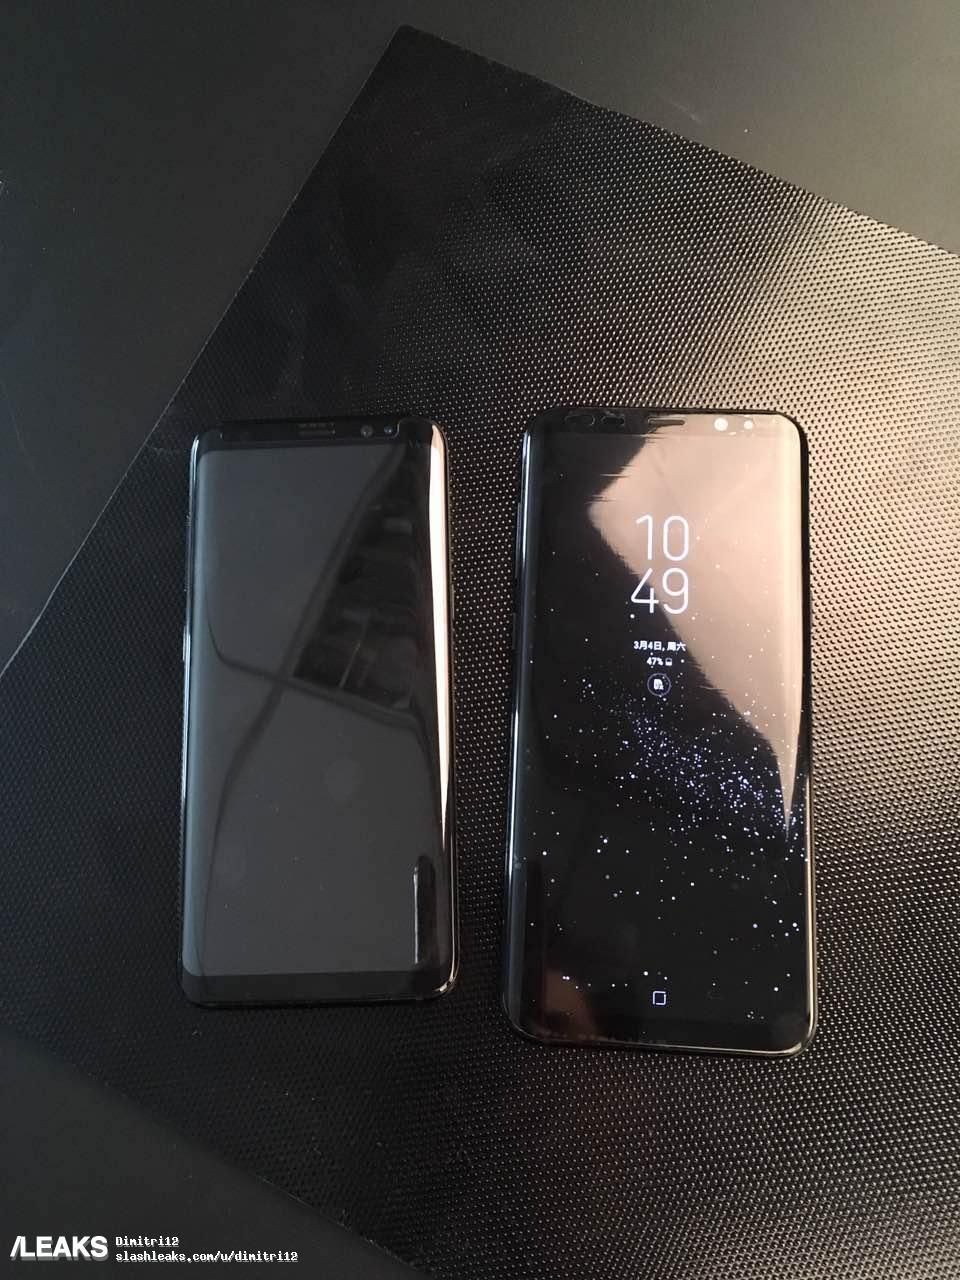 new samsung galaxy s8 and s8 plus leak shows two phones side by side image 2